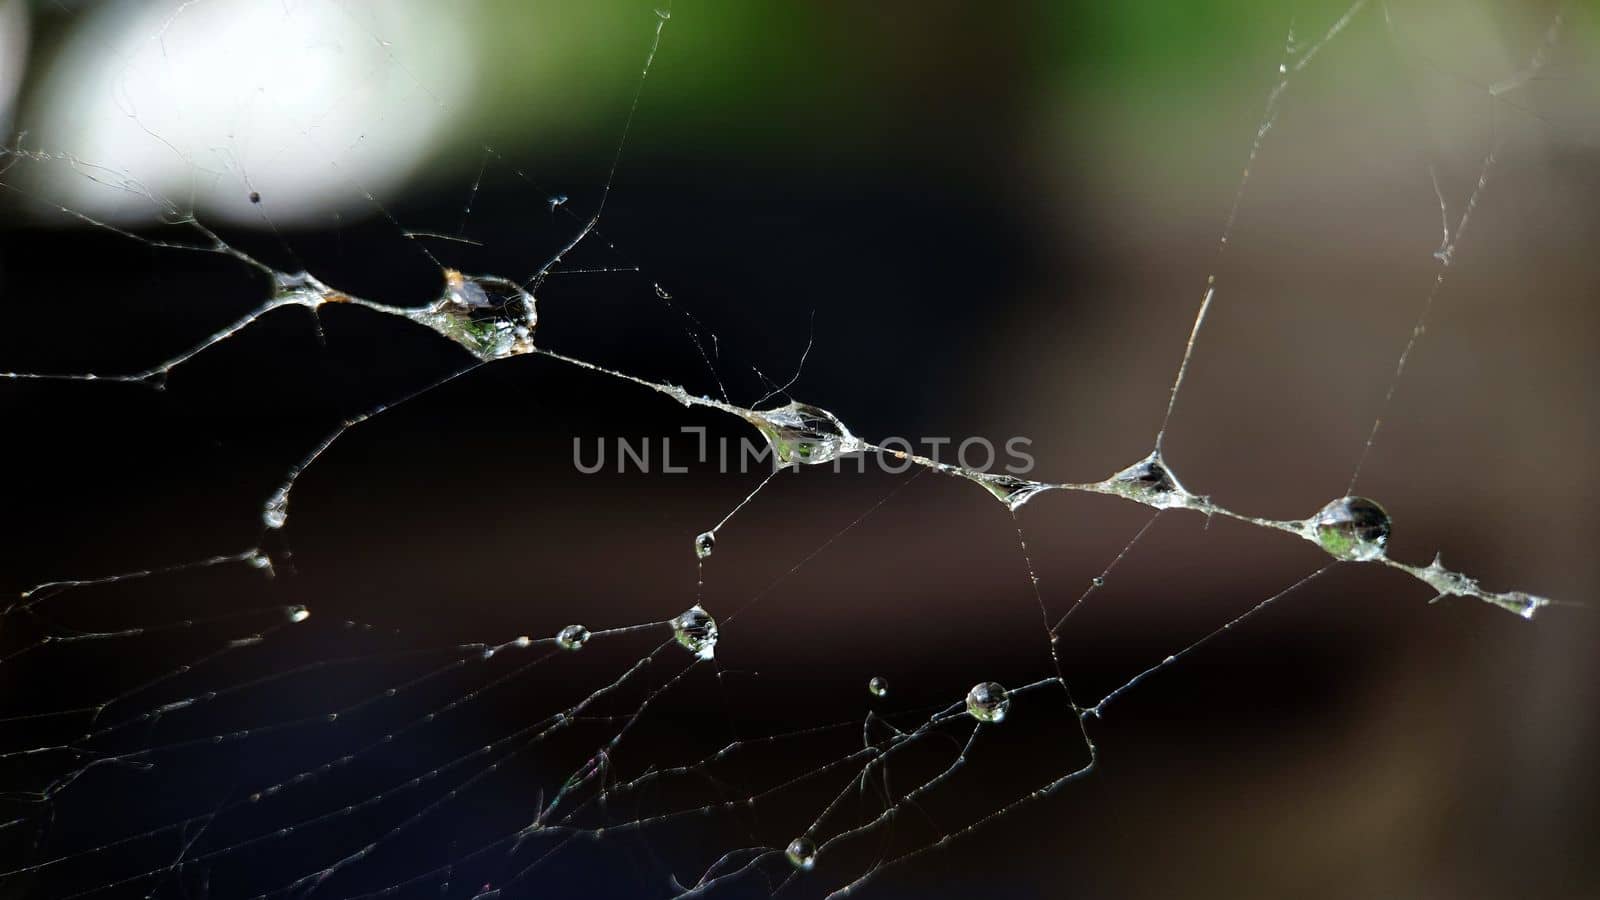 Background texture of a spider web with raindrops by Mastak80